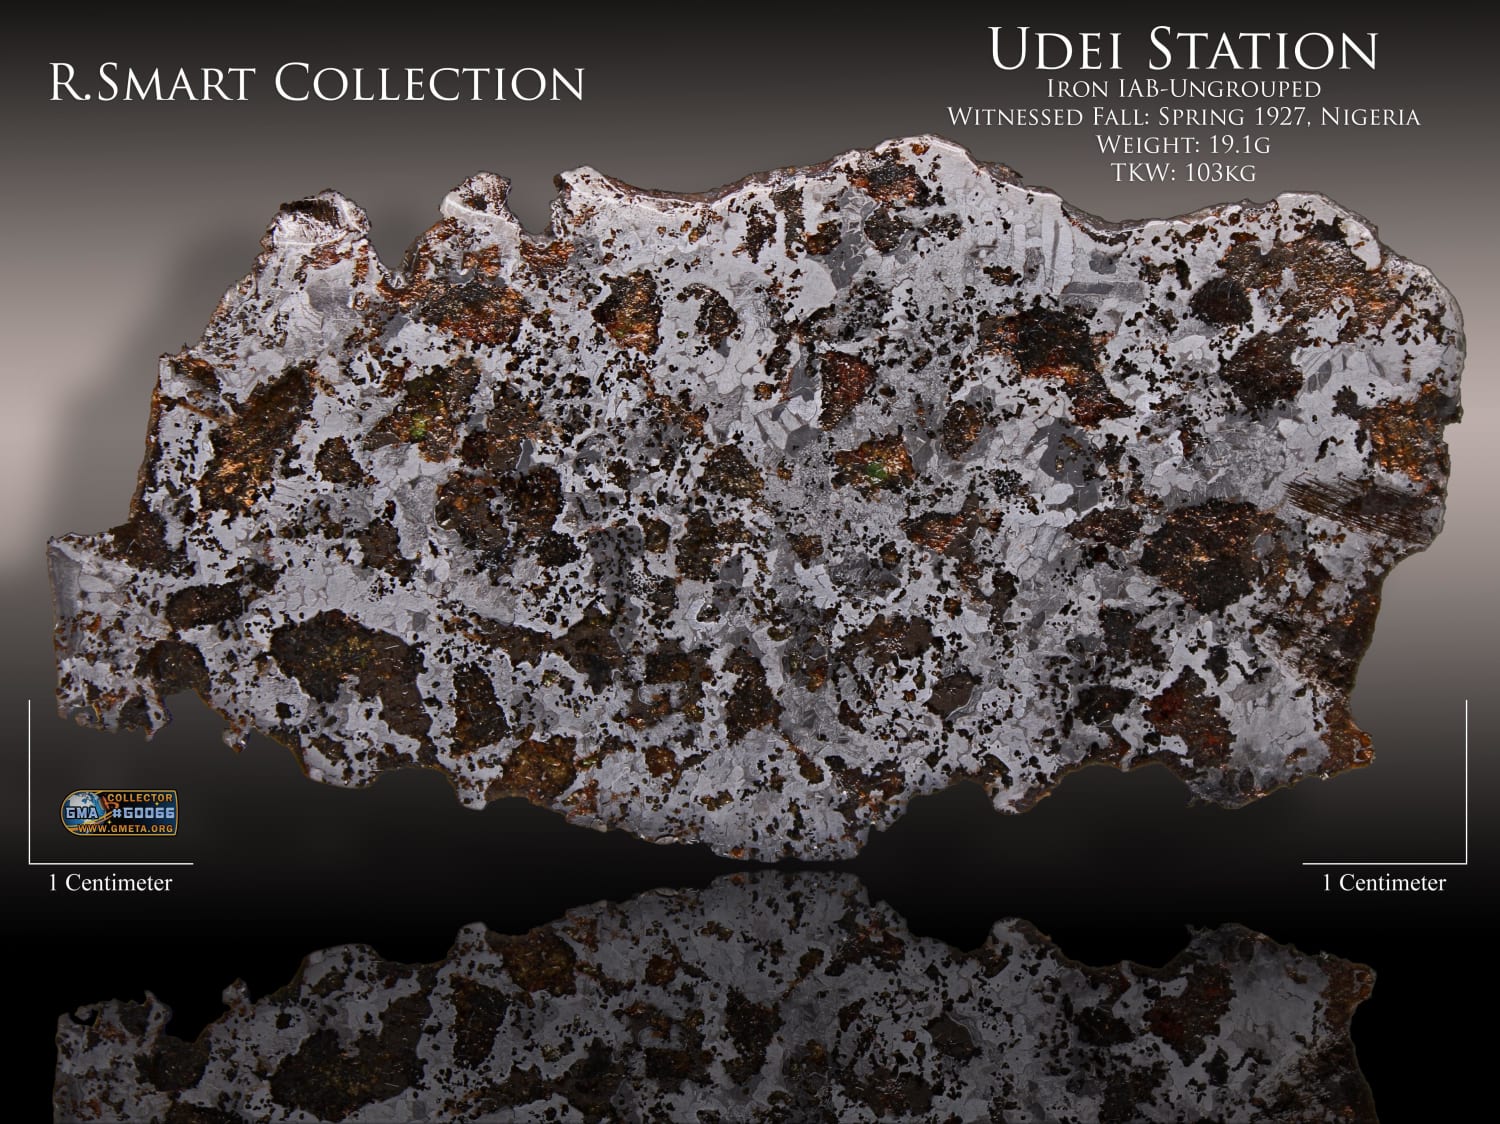 A bit different Space Porn. Here is one of my slices of the "Udei Station" meteorite, a witnessed fall over Nigeria in Spring of 1927. A beautifully silicated iron meteorite, classified as Iron IAB-Ungrouped. Hi-Res, Zoom in!